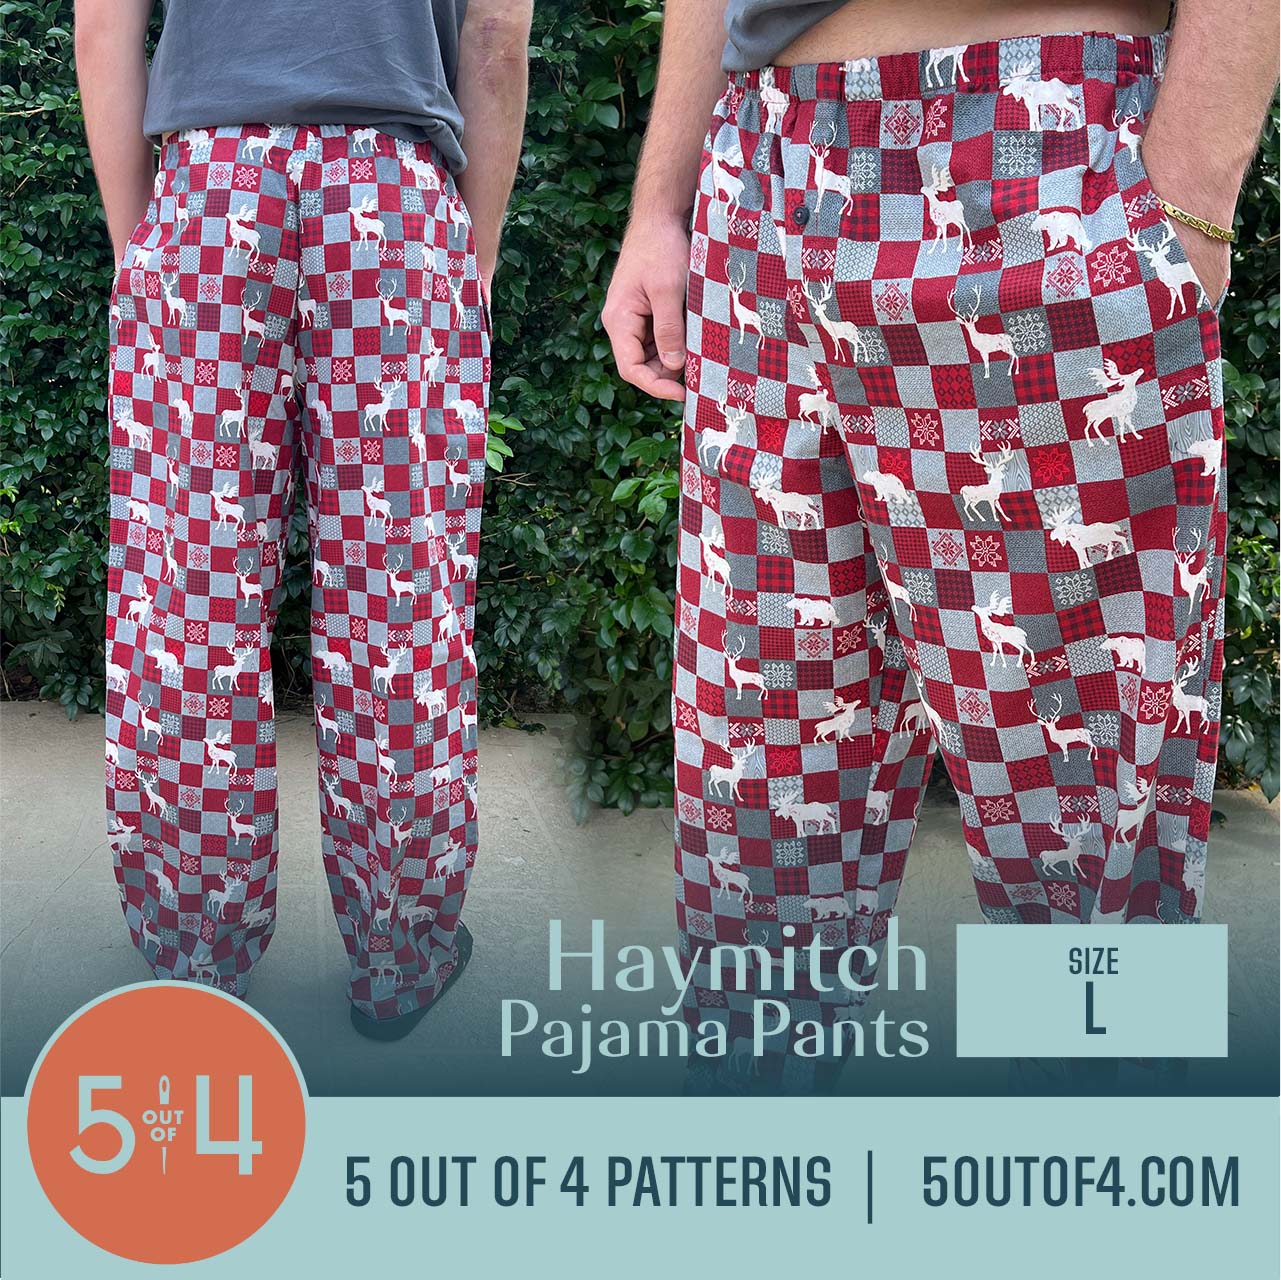 Tutorial: Sew jogger pants from a pajama pants pattern – Sewing